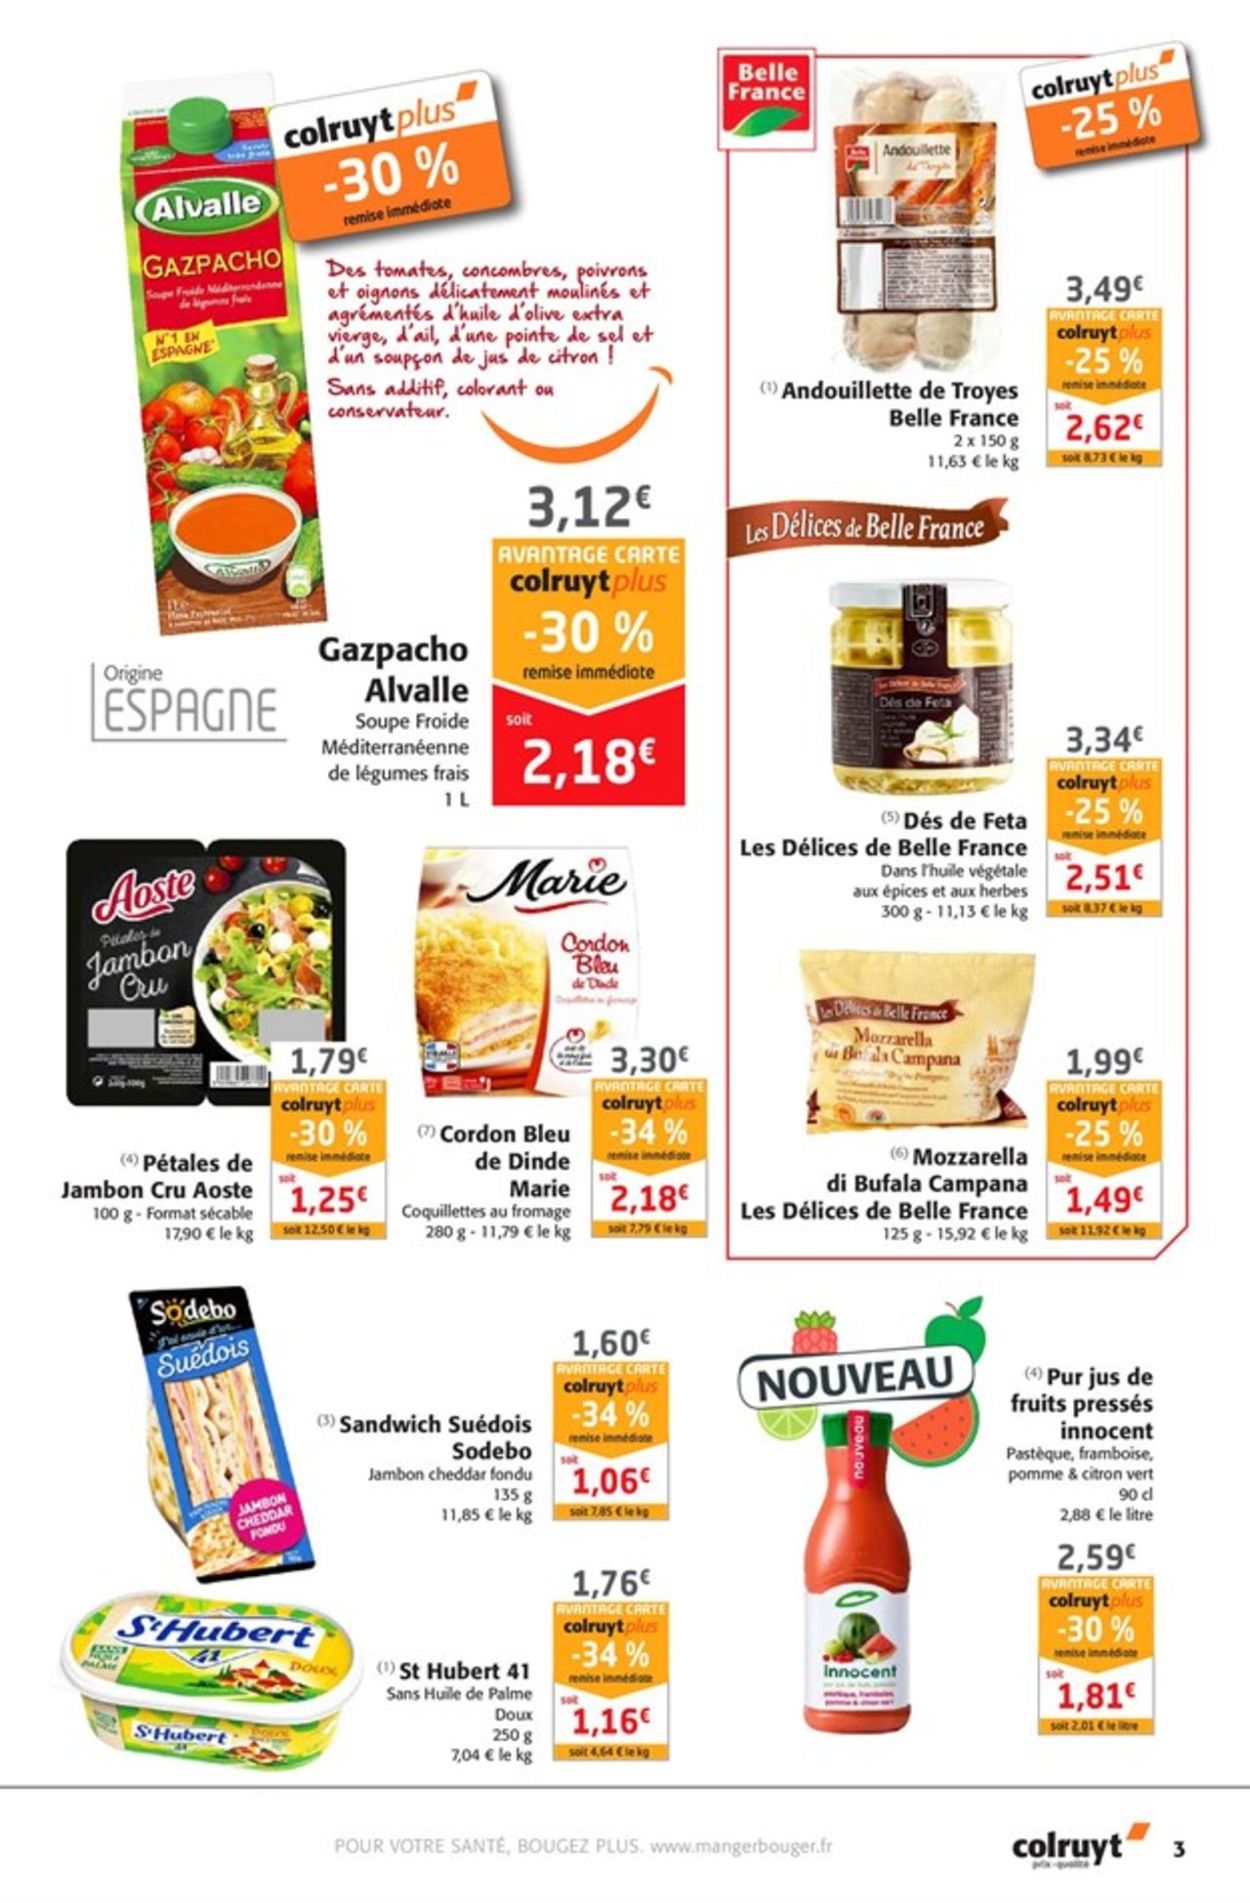 Colruyt Catalogue - 08.05-19.05.2019 (Page 3)